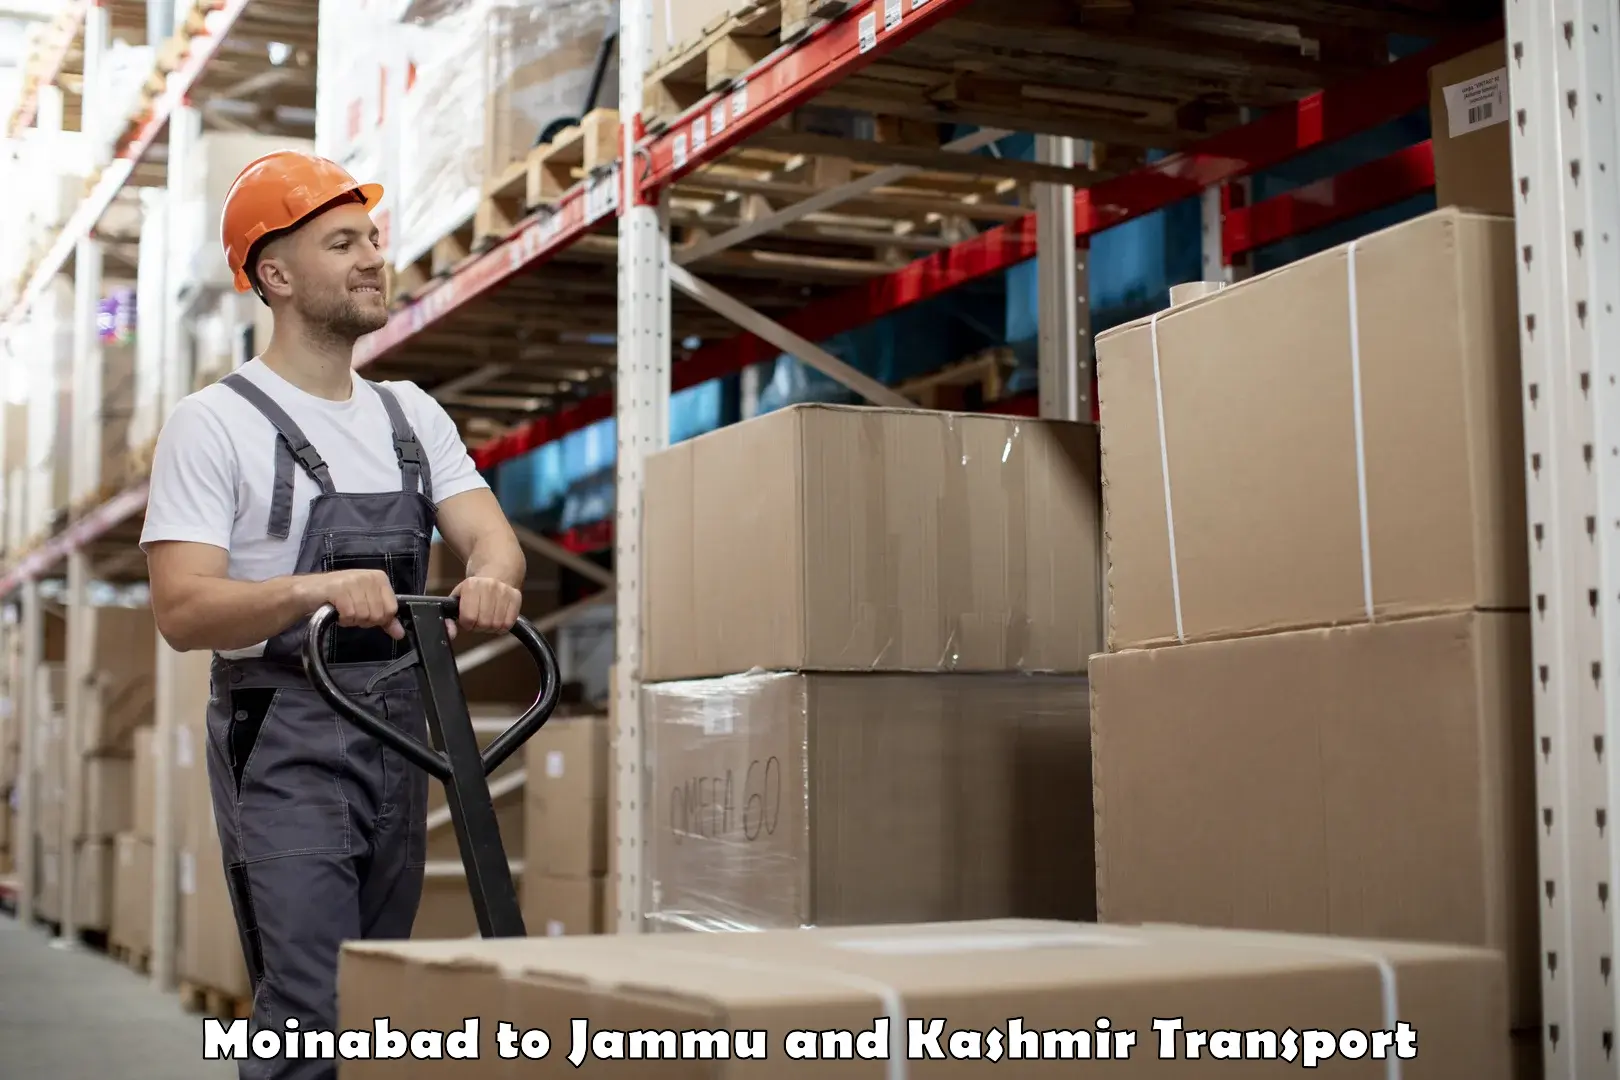 Cycle transportation service Moinabad to Jammu and Kashmir